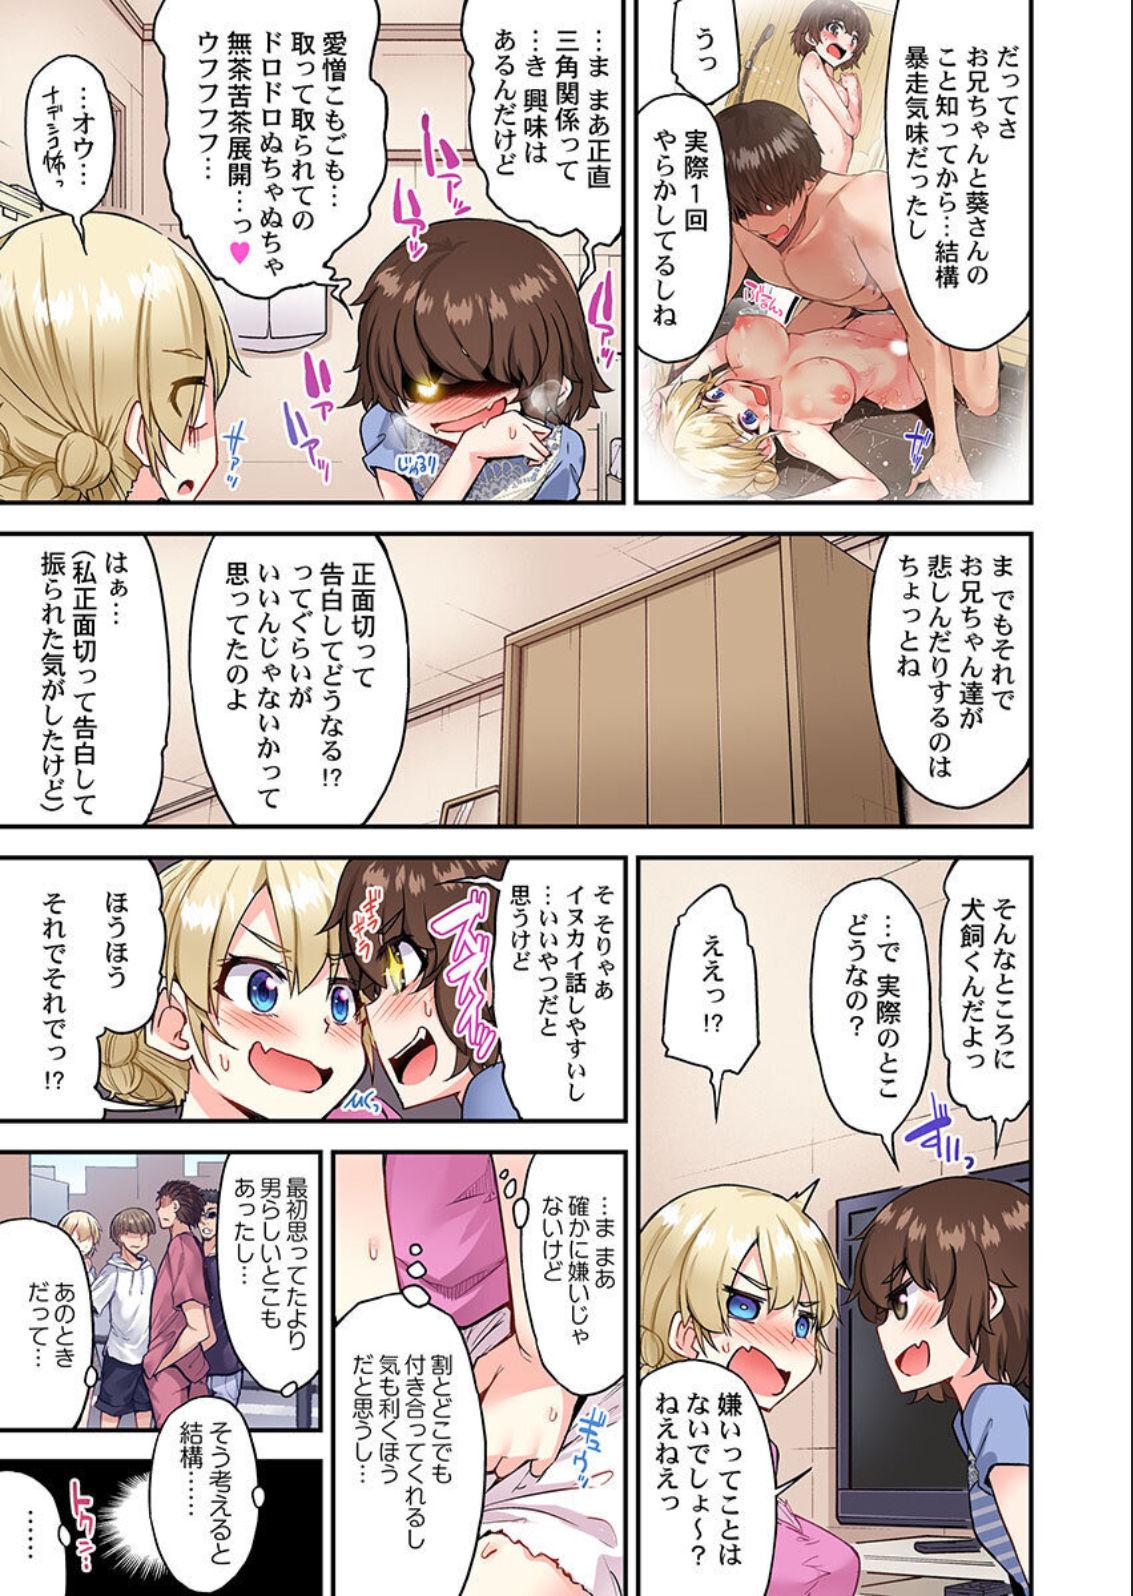 Piss Traditional Job of Washing Girls' Body Ch. 45 - 48 Gaygroup - Page 6